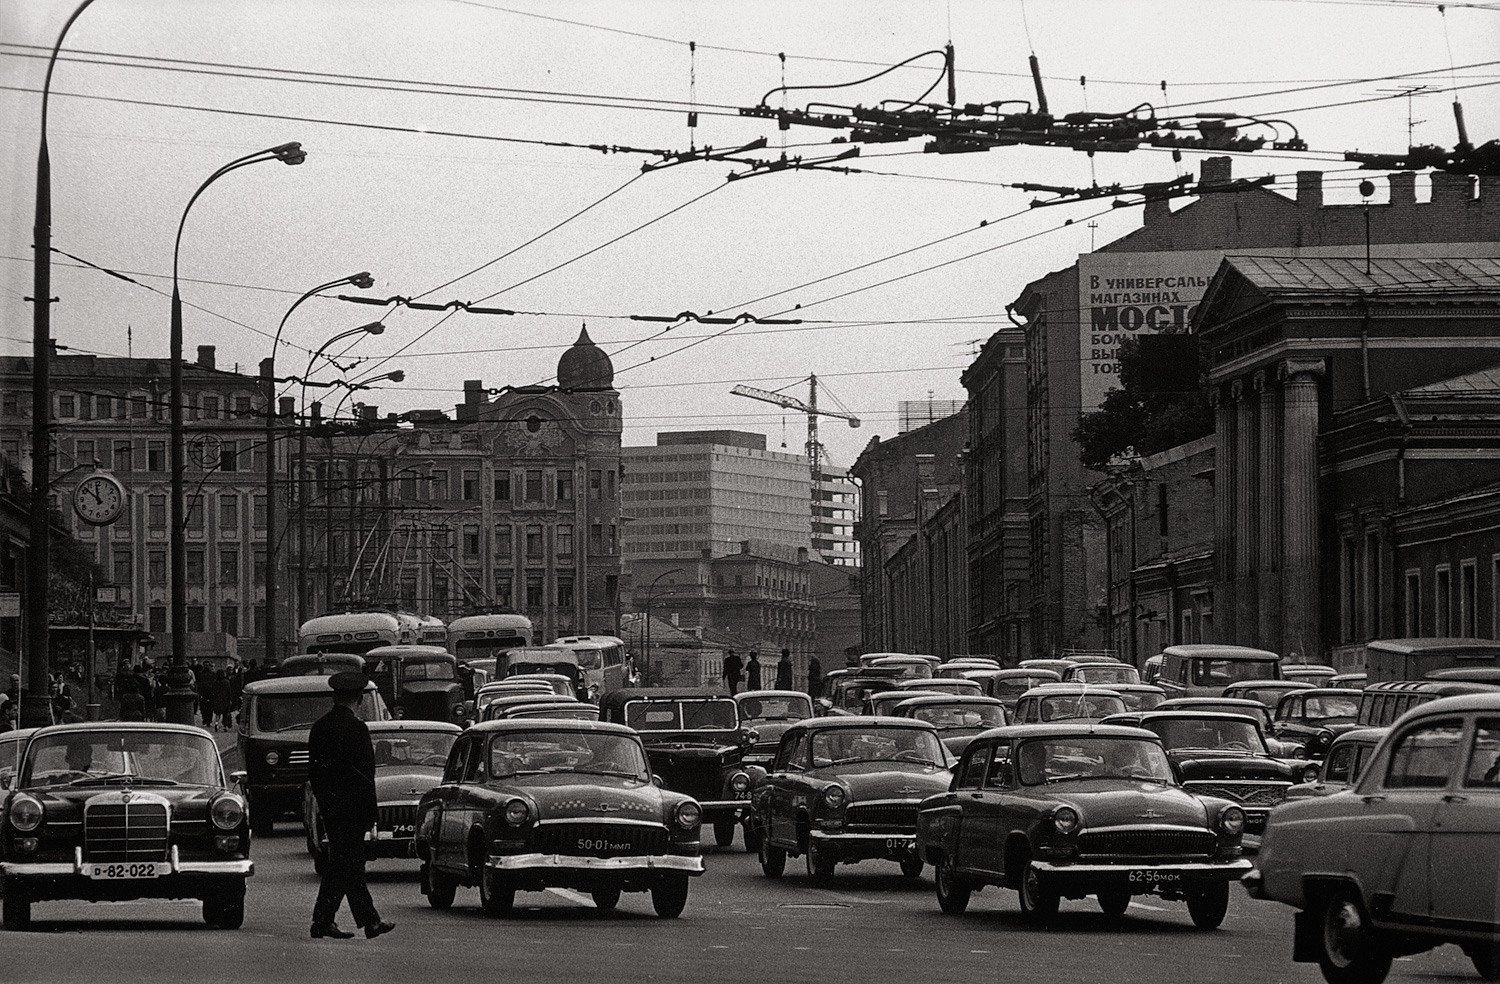 Artwork by Arno Fischer, Views of Moscow, Made of vintage gelatin silver prints